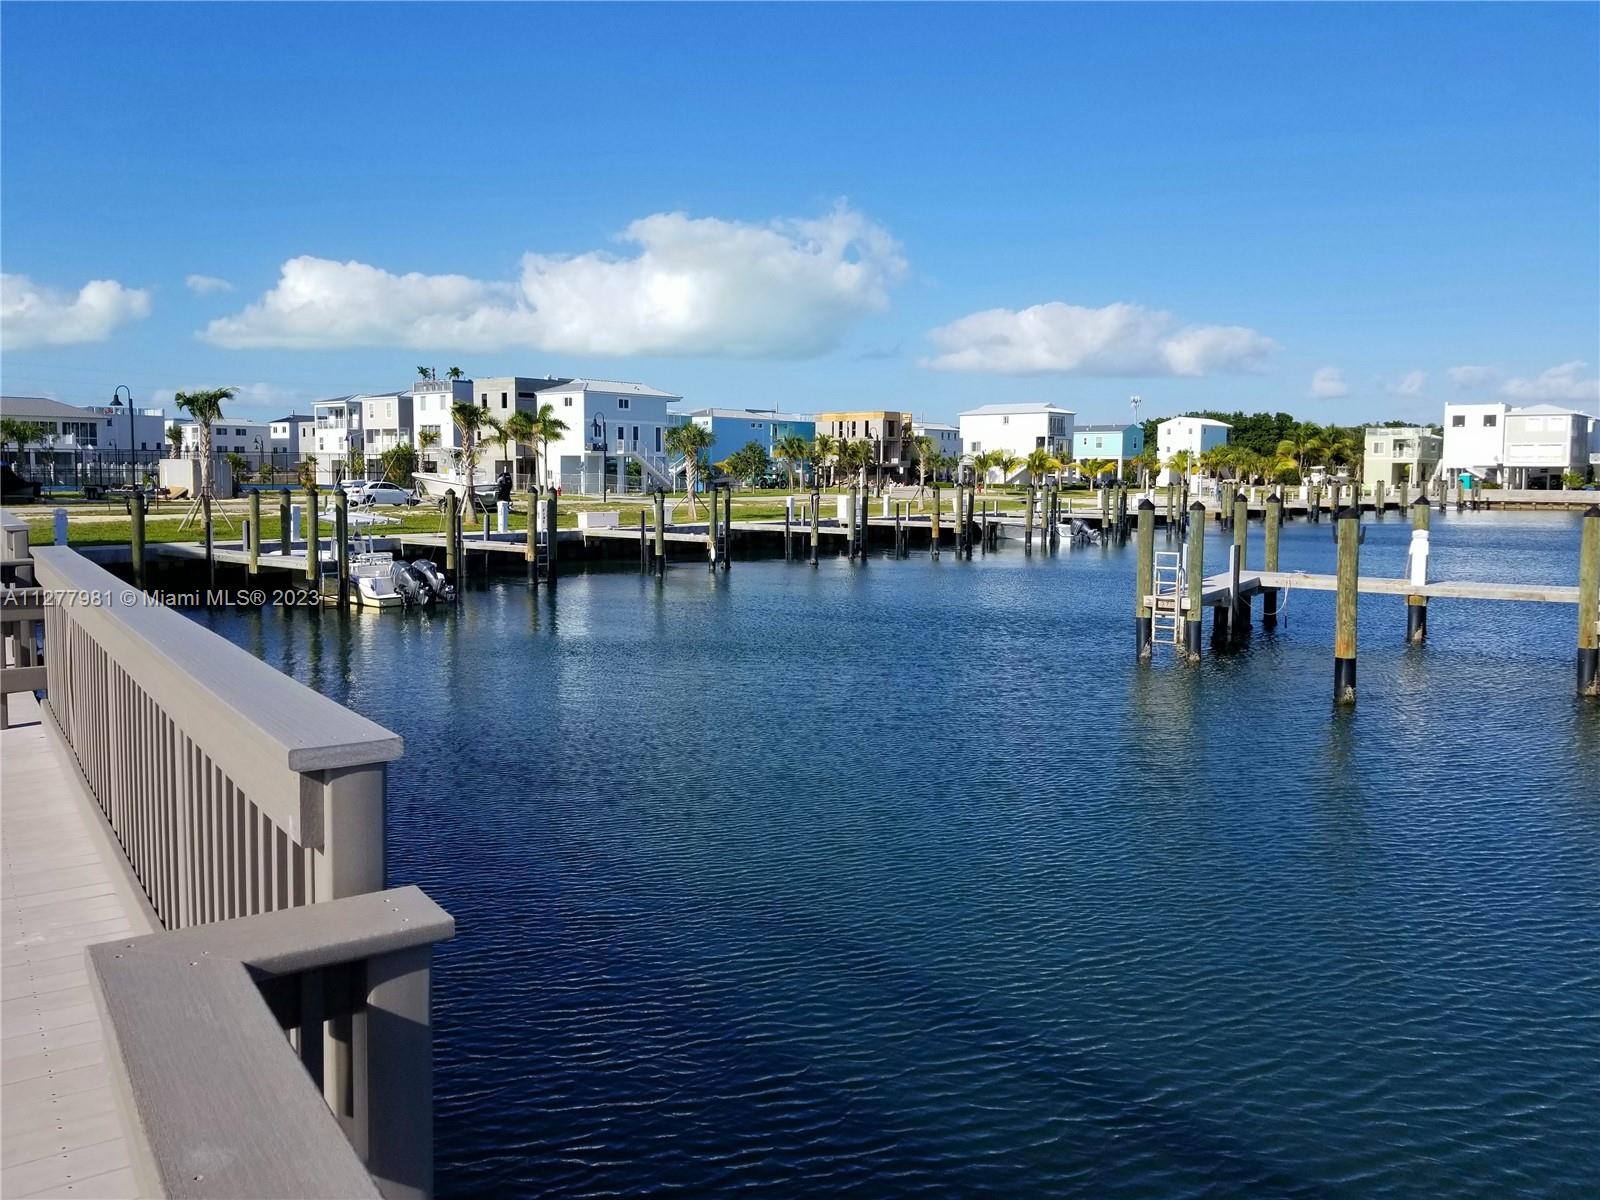 View of Dock and Community from Pier